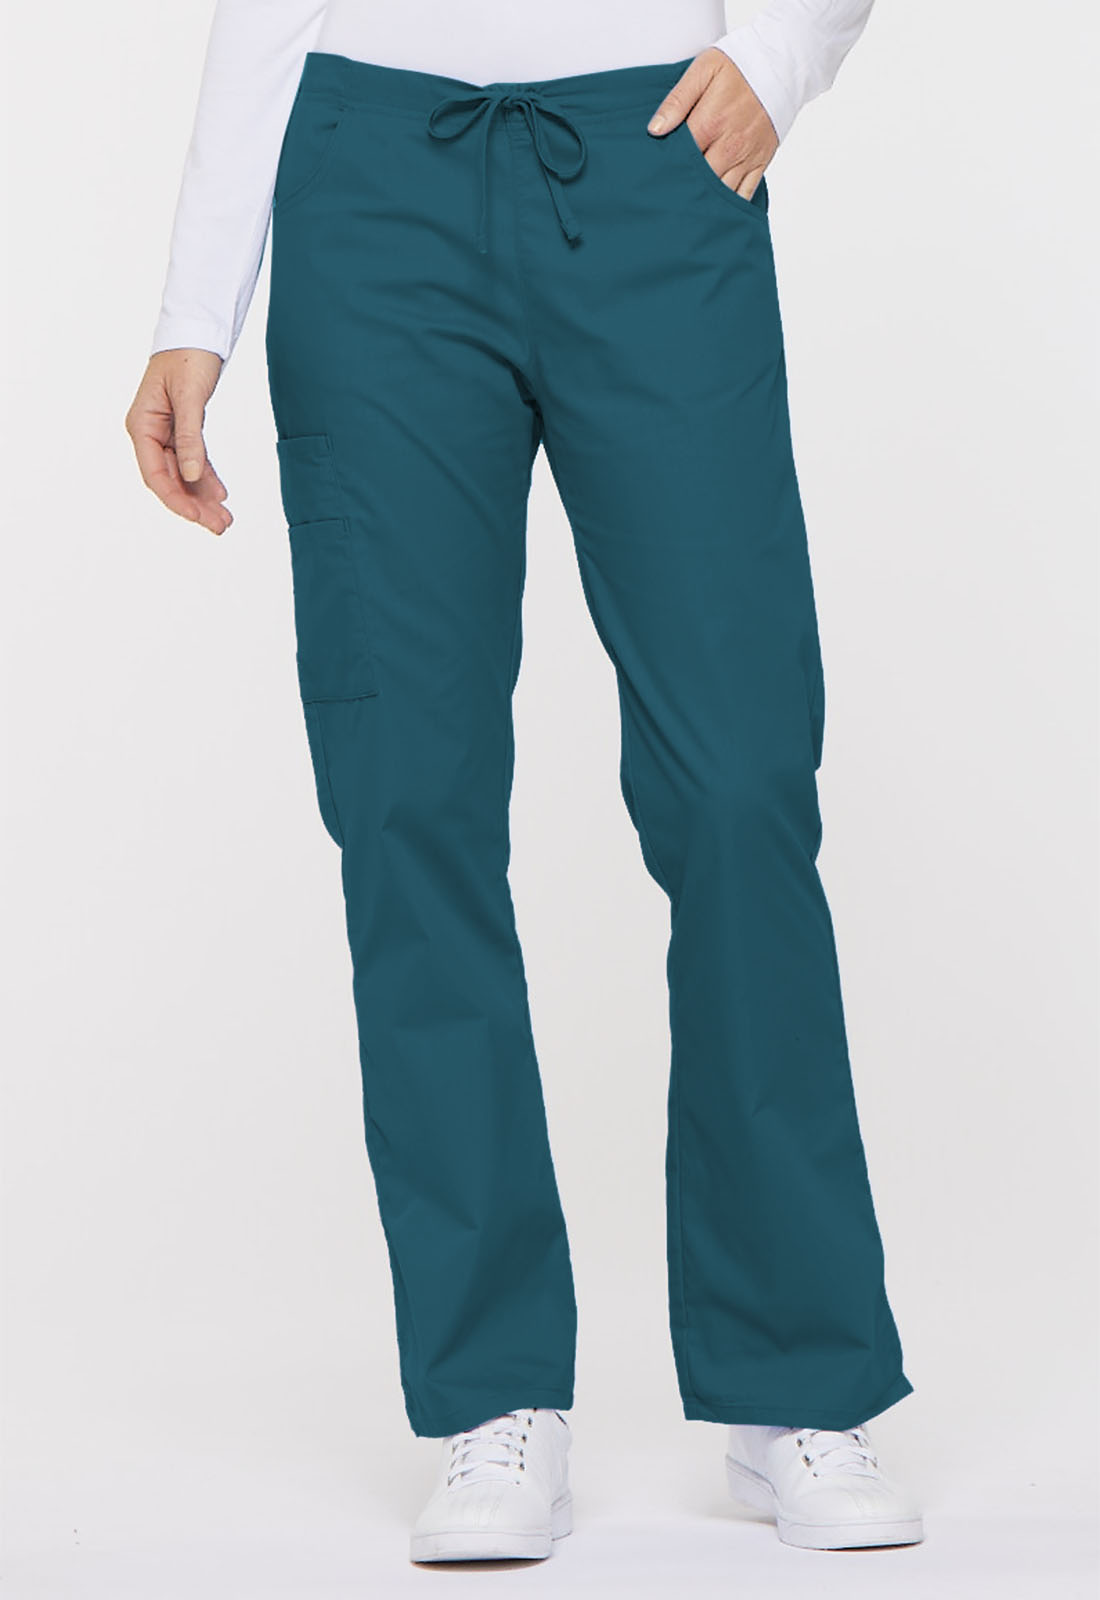 Dickies Women's Cargo Scrub Pants, Mid Rise with Drawstring - 86206 - image 1 of 7